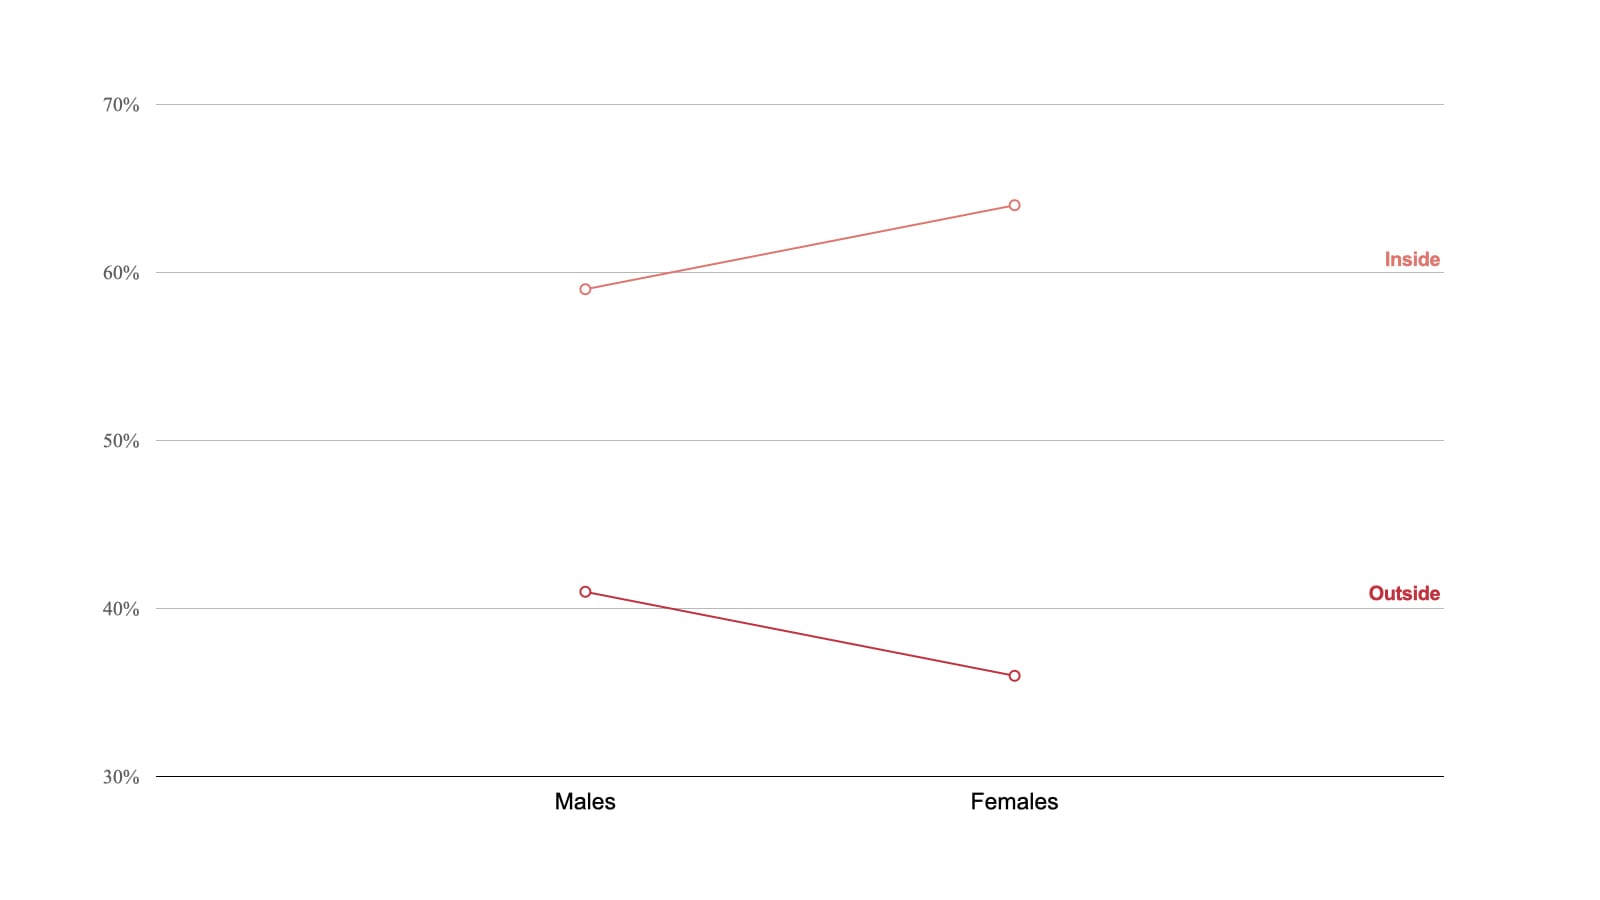 gender also plays a role in shaping beauty perceptions. Men put a bit more importance on looks, though ‘who people are on the inside’ is still the primary influence.